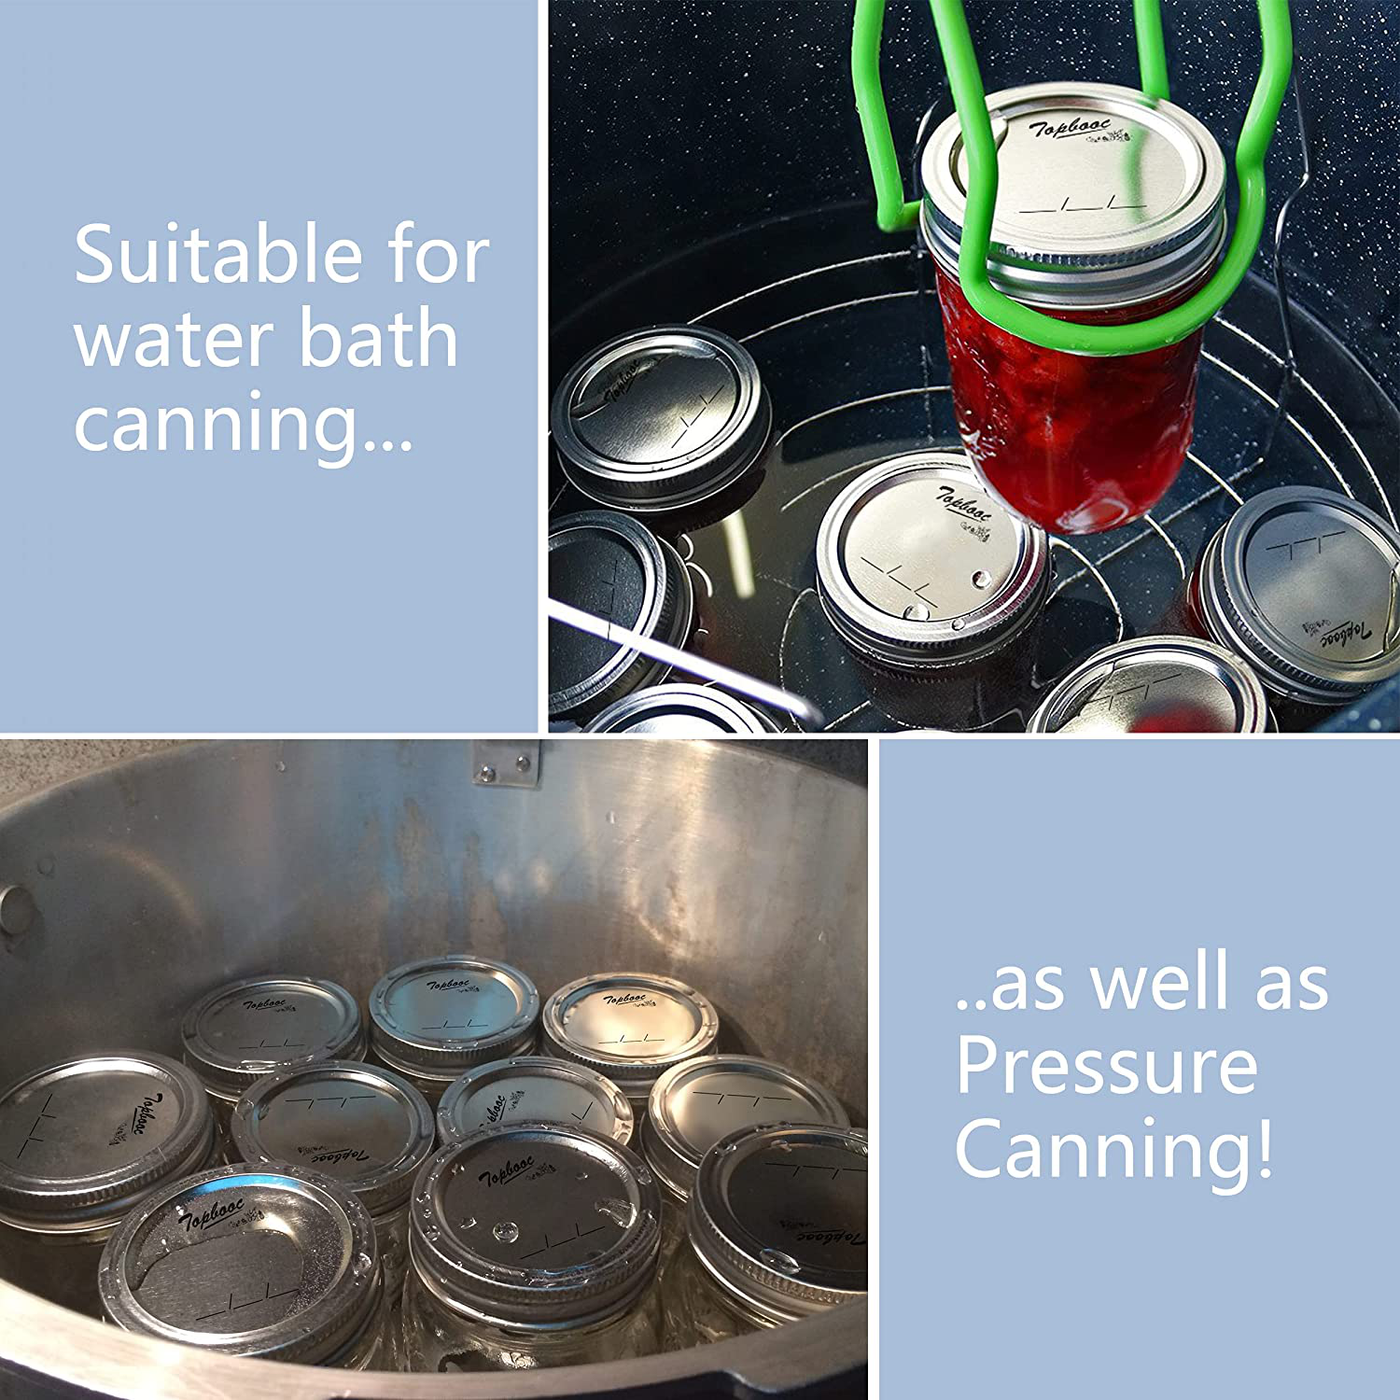 300-Count,Regular Mouth Canning Lids for Ball, Kerr Jars - Split-Type Metal Mason Jar Lids for Canning - Food Grade Material, 100% Fit & Airtight for Regular Mouth Jars